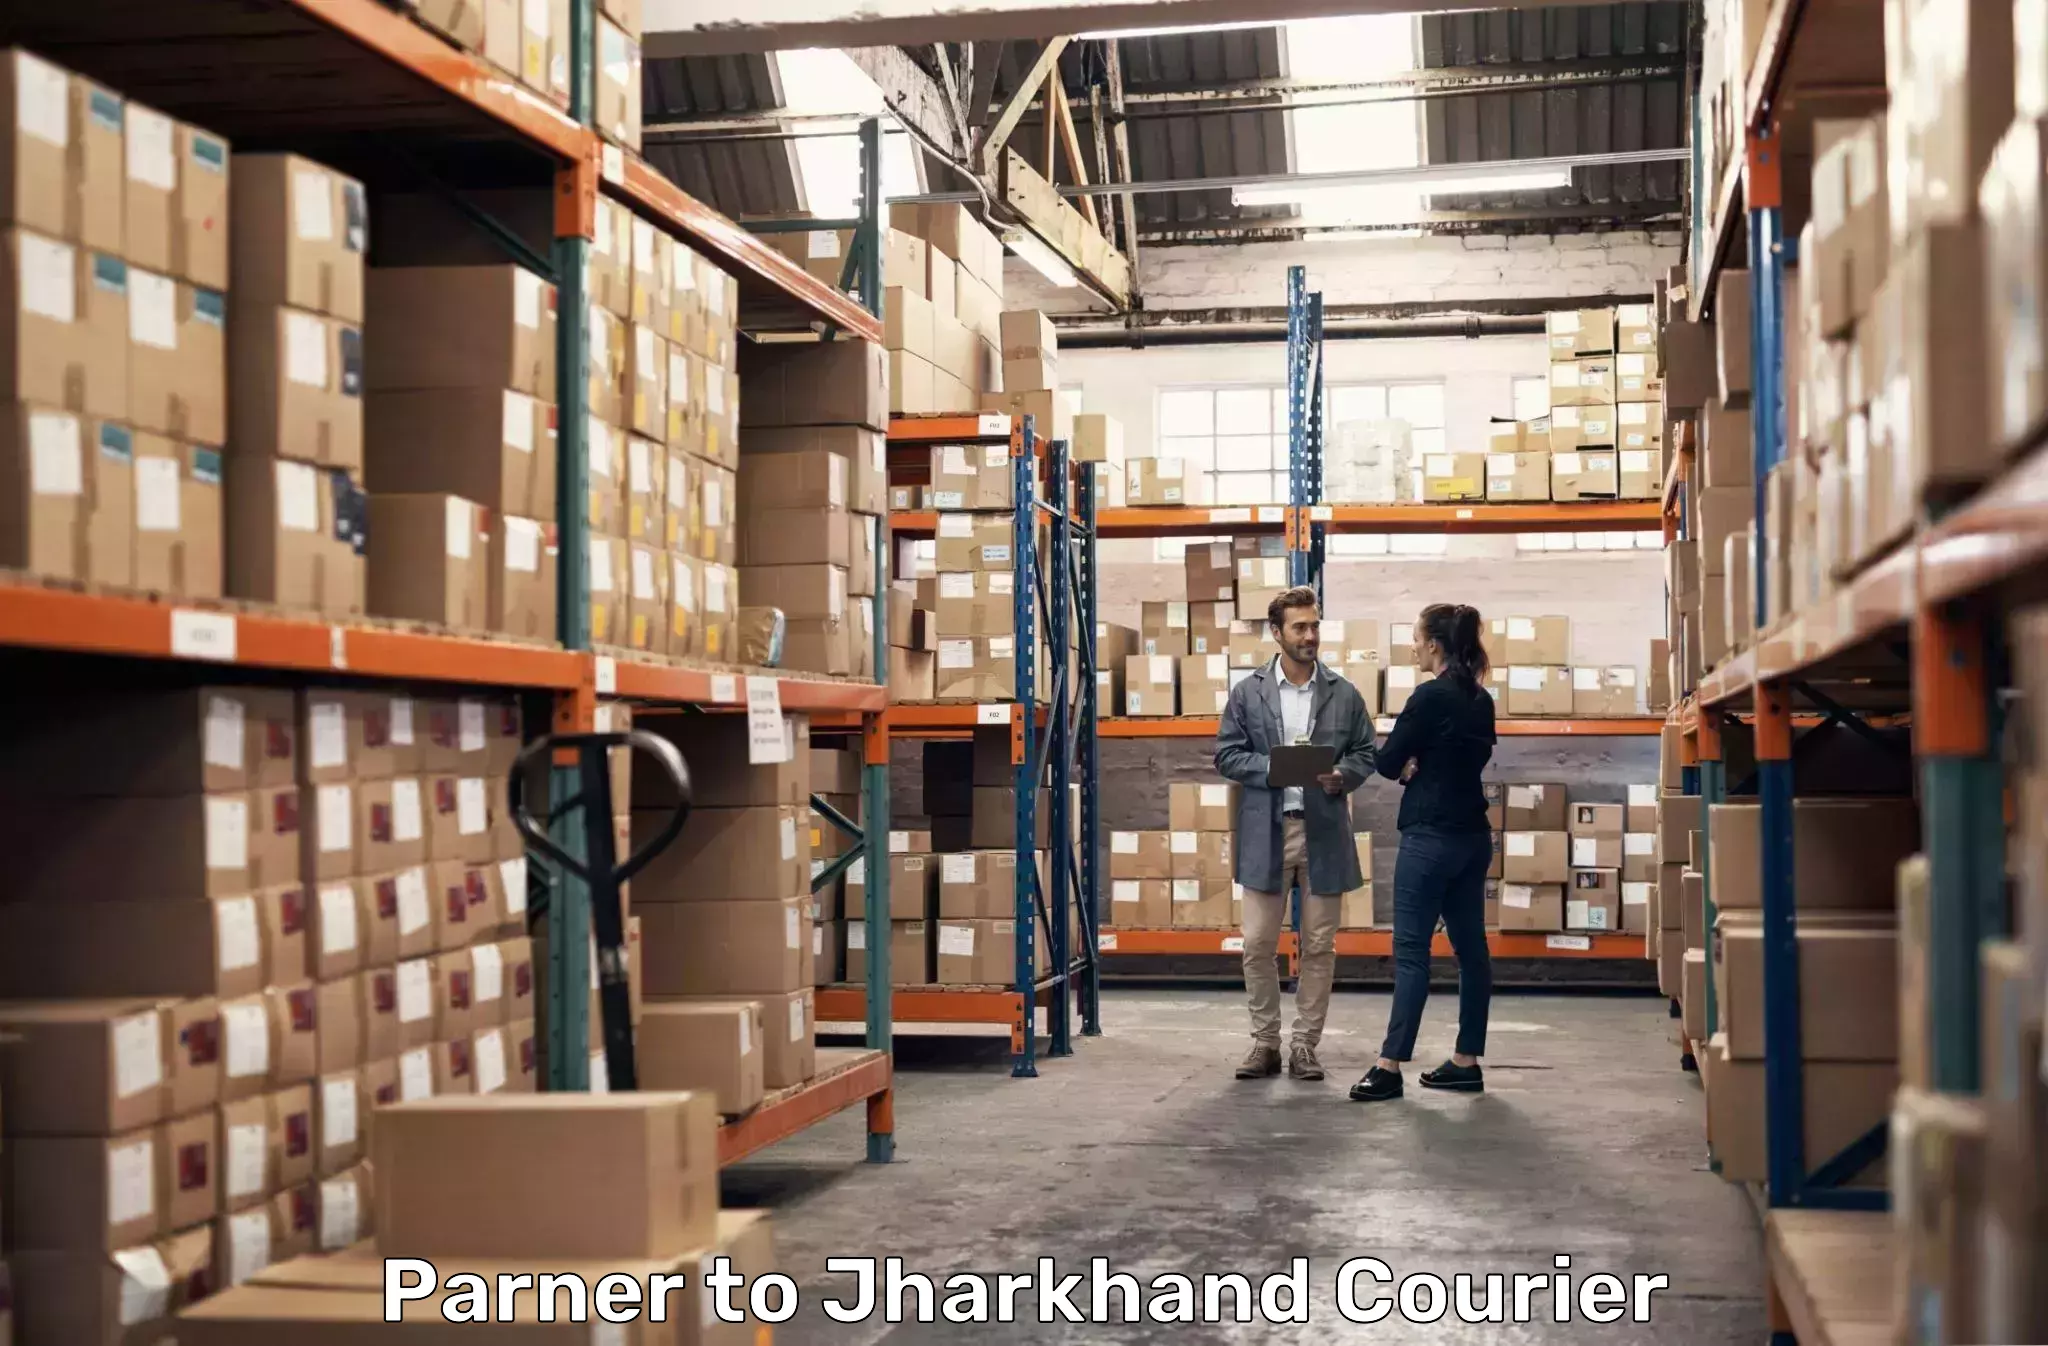 Express courier facilities Parner to Jharkhand